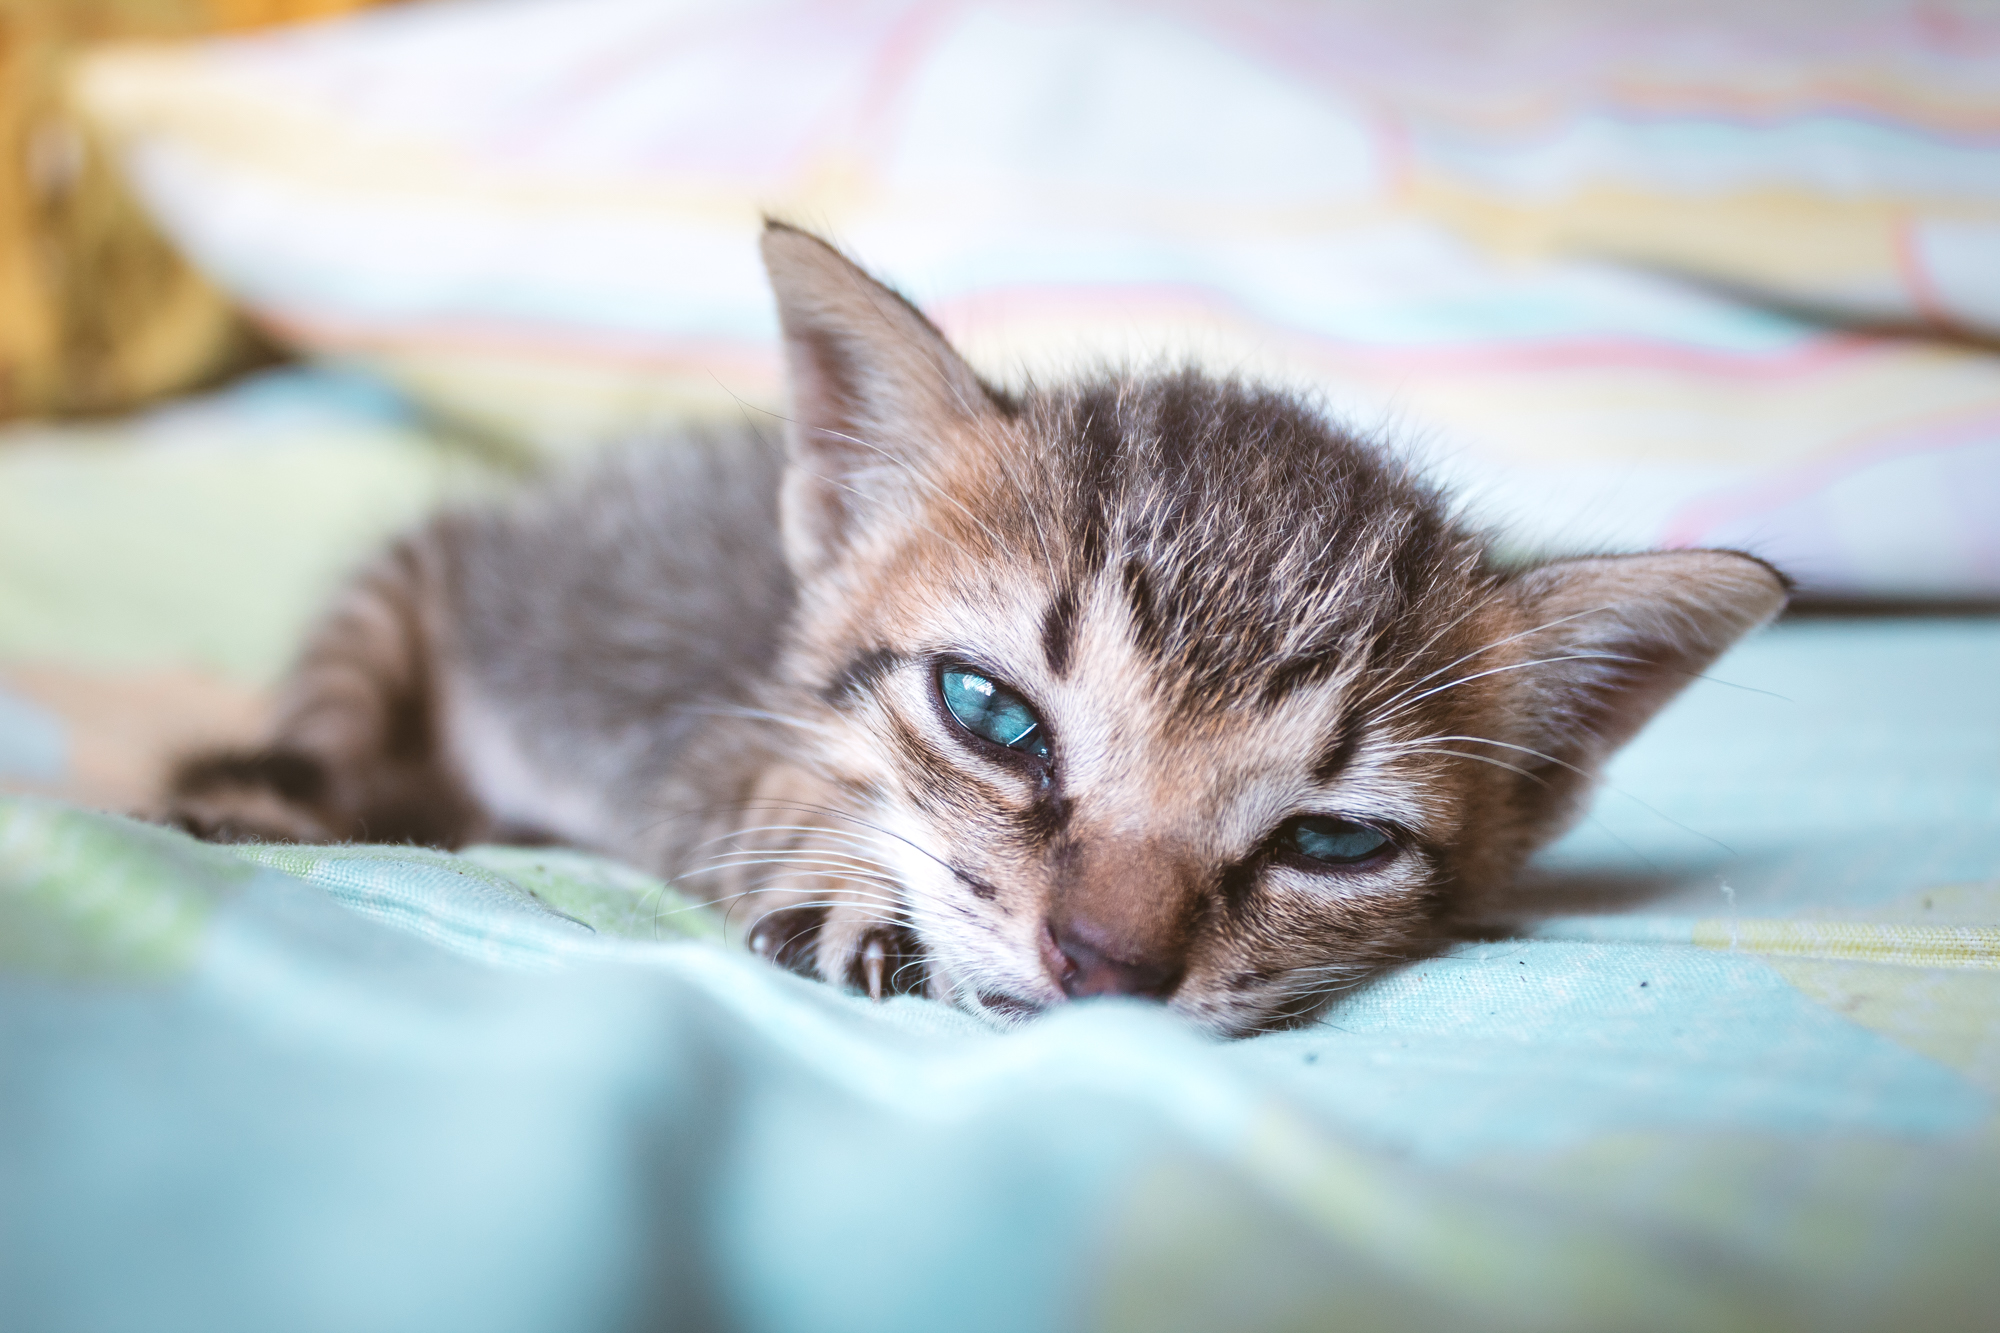 caturday pic of a kitten with stunning blue eyes